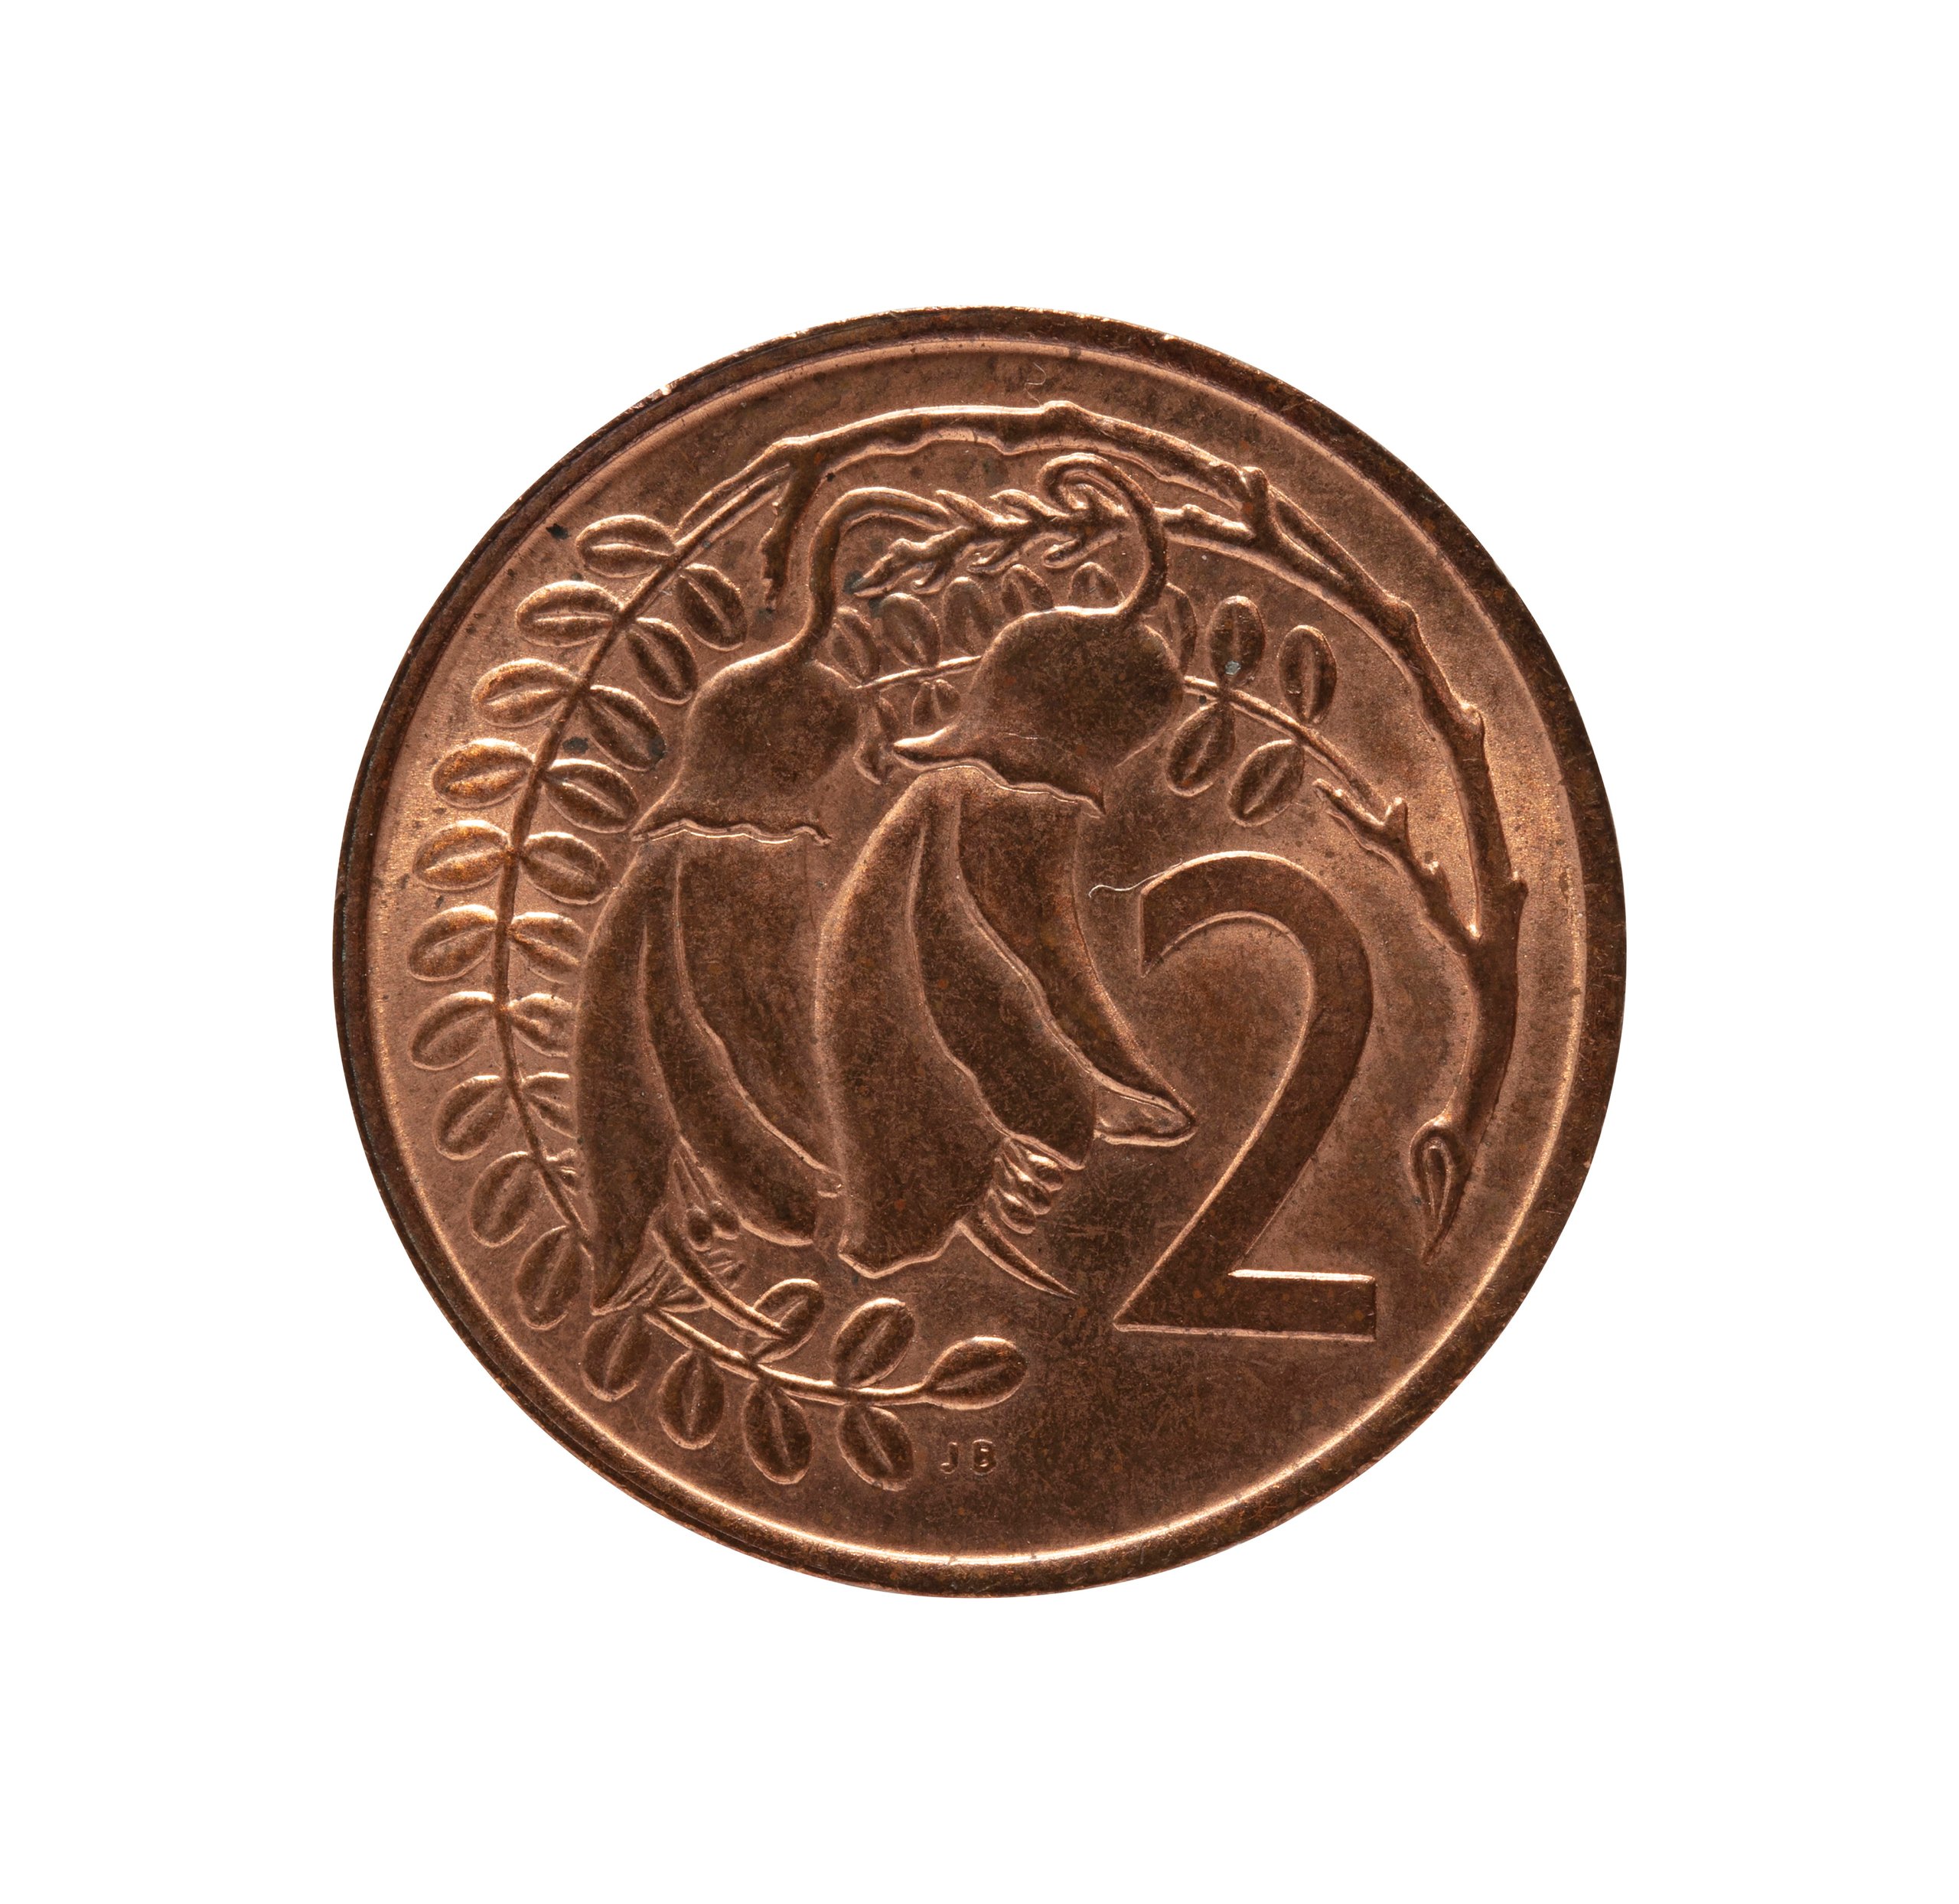 New Zealand Two Cents coin